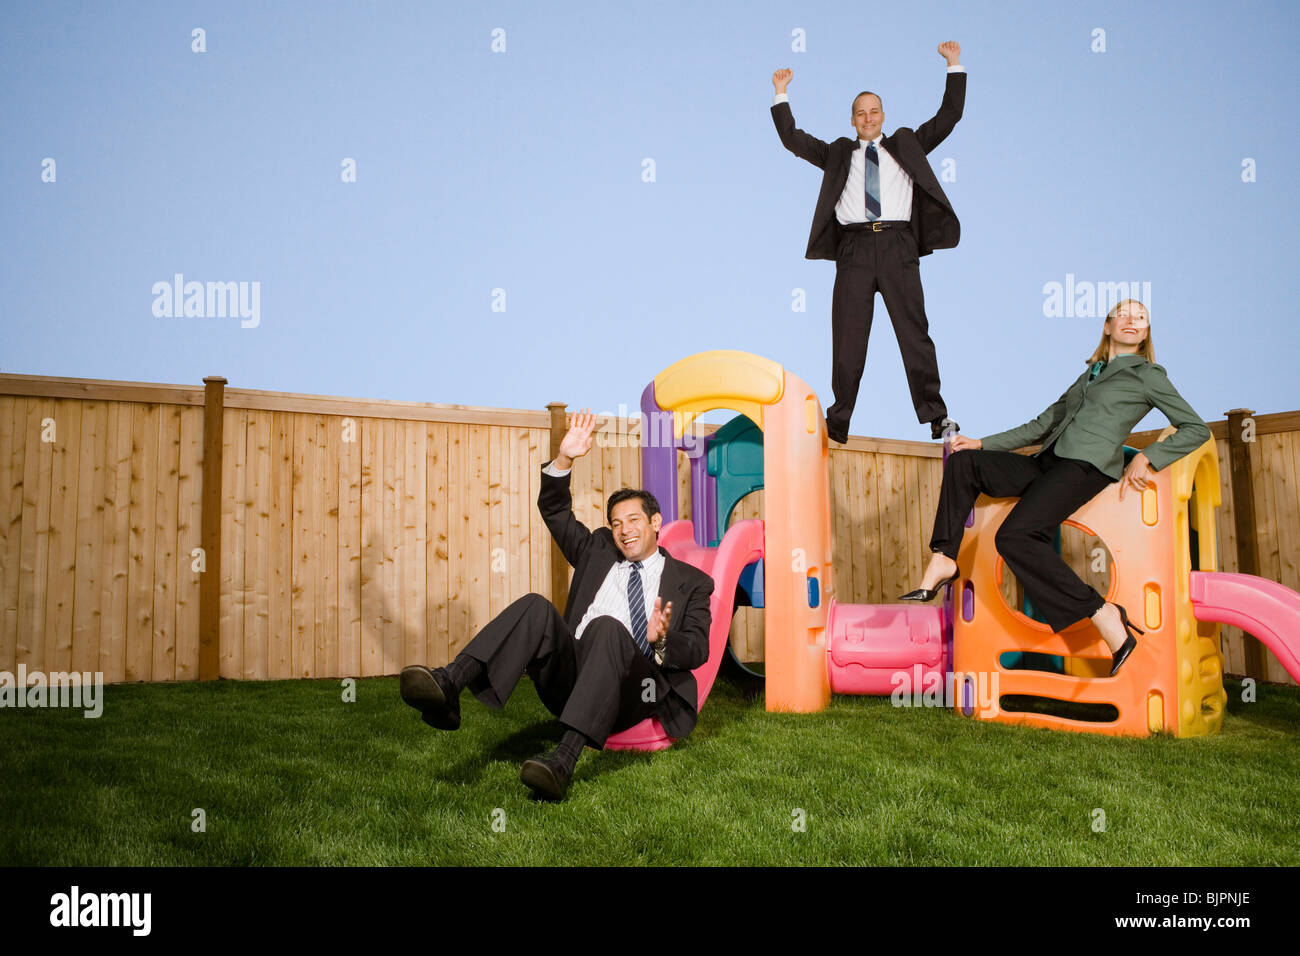 Business people on play structure Stock Photo